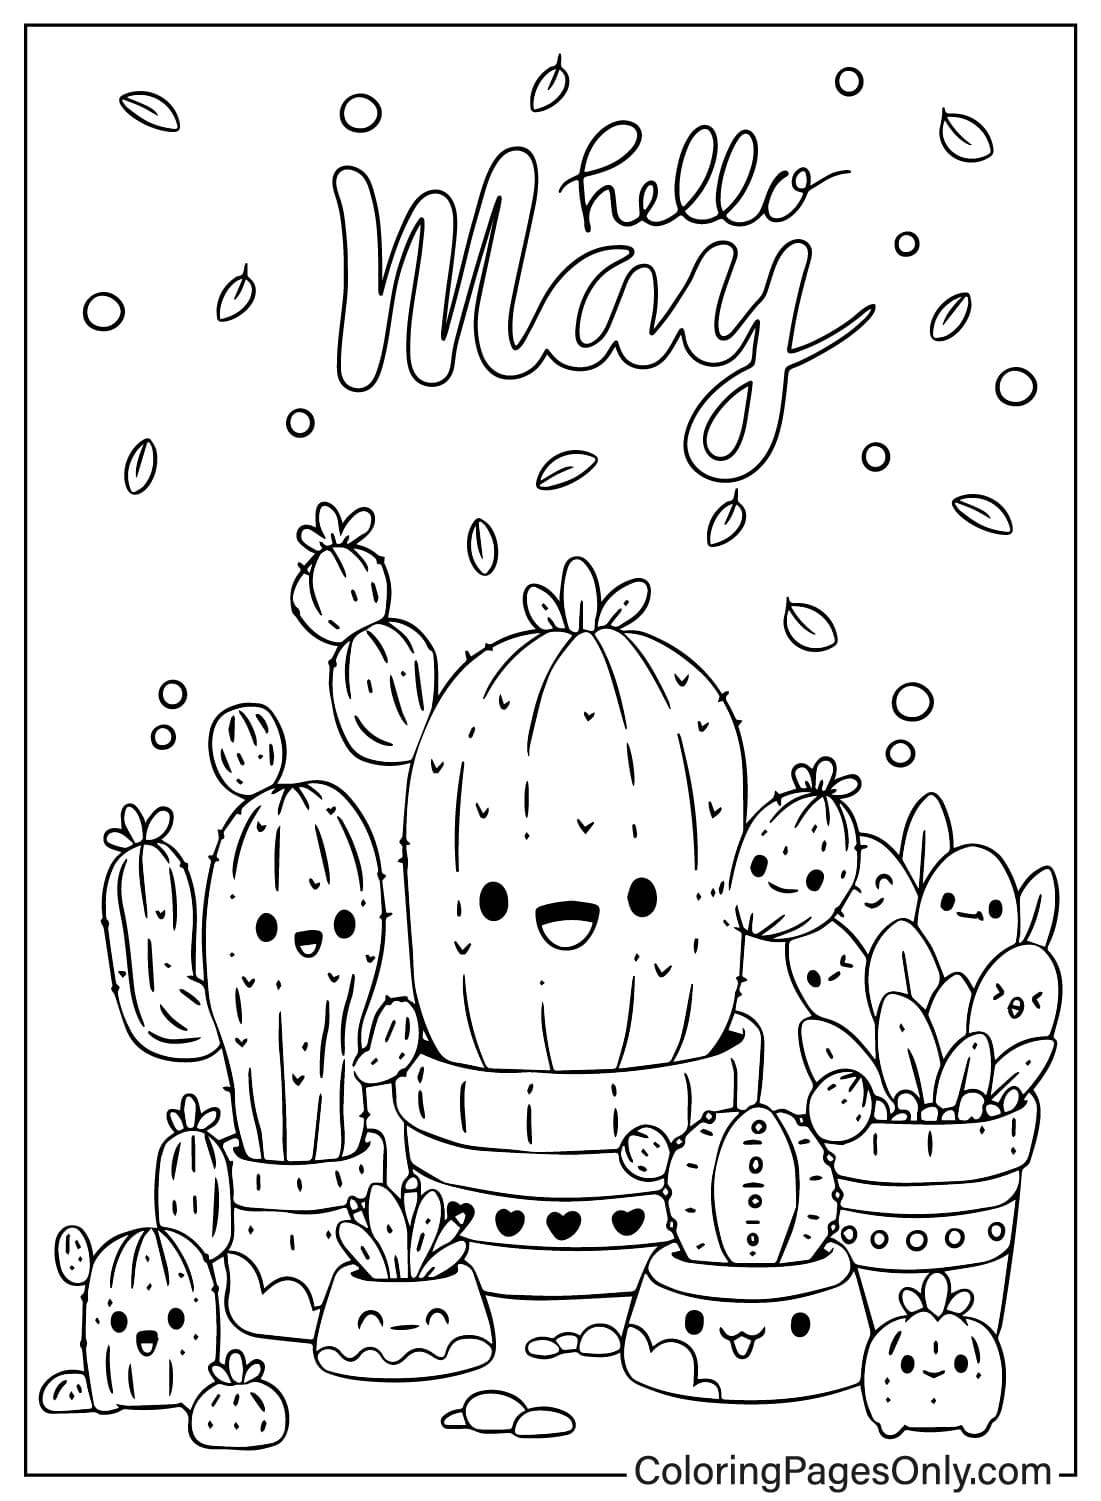 Cactus May Coloring Page from Nature & Seasons